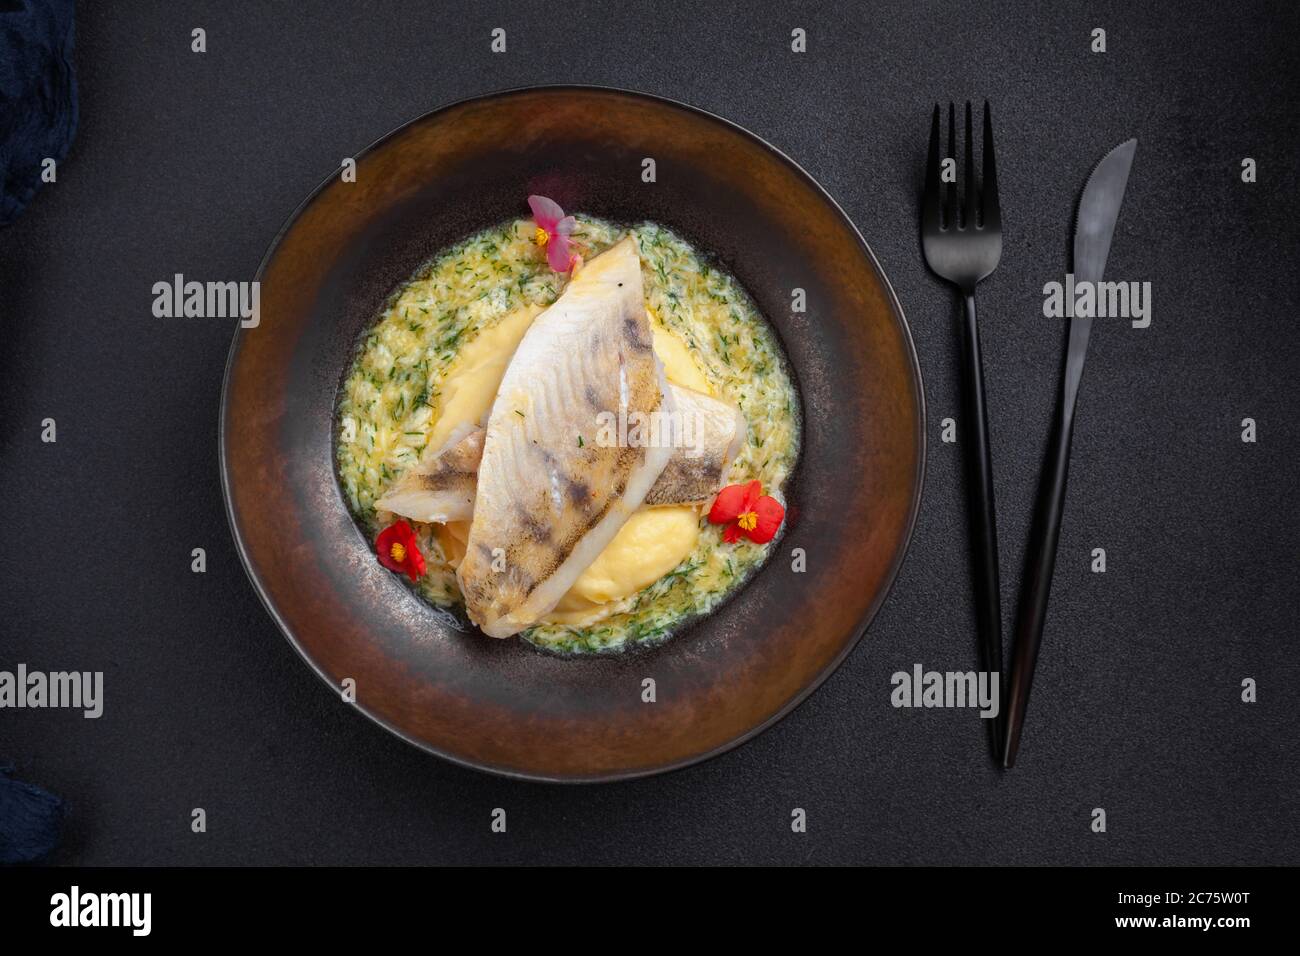 Steamed hot fish dish pike perch with Polish sauce Stock Photo - Alamy